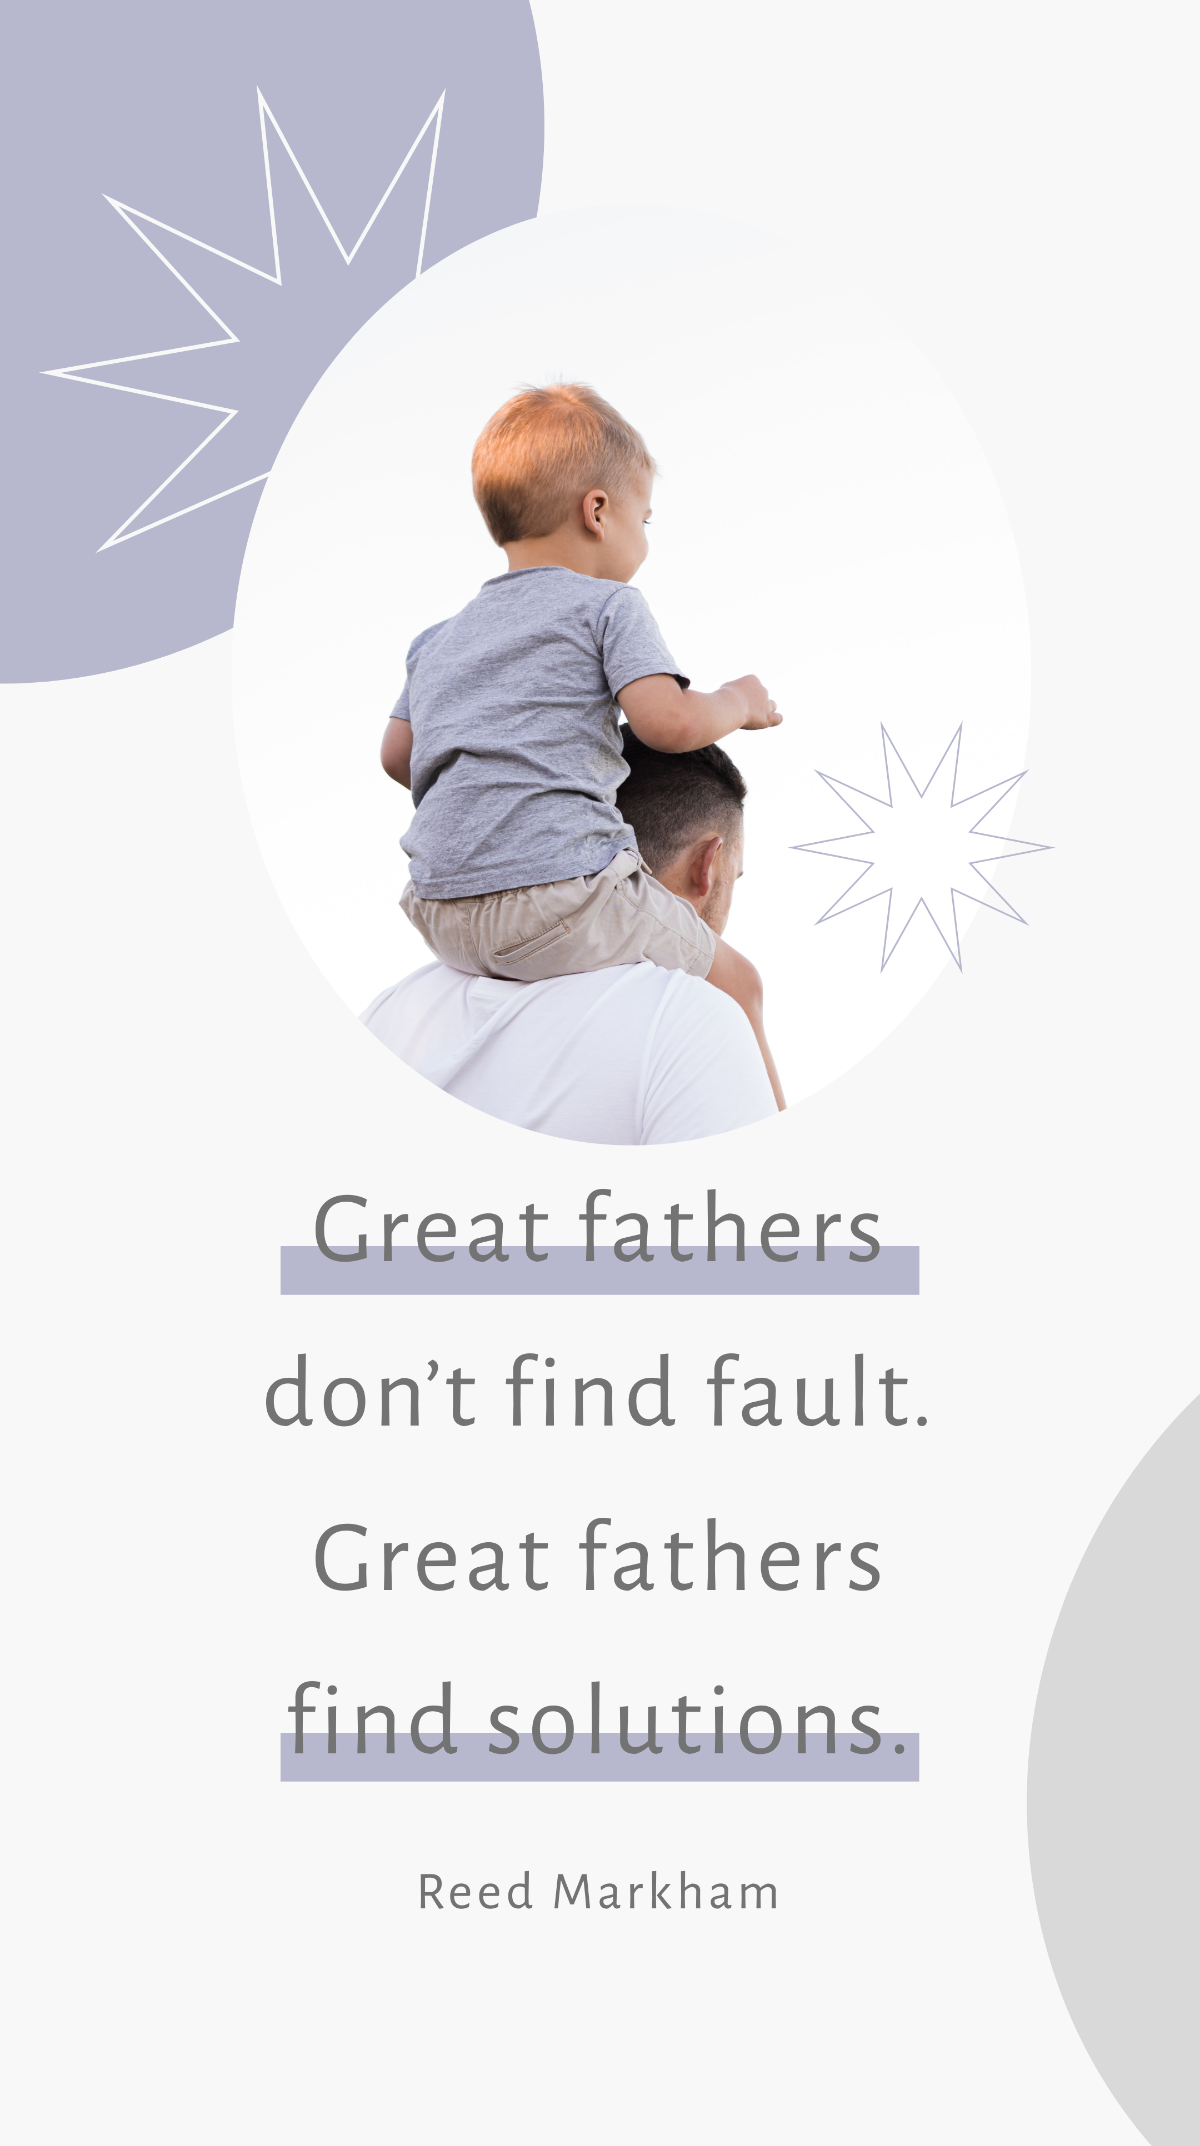 Reed Markham - Great fathers don’t find fault. Great fathers find solutions. Template